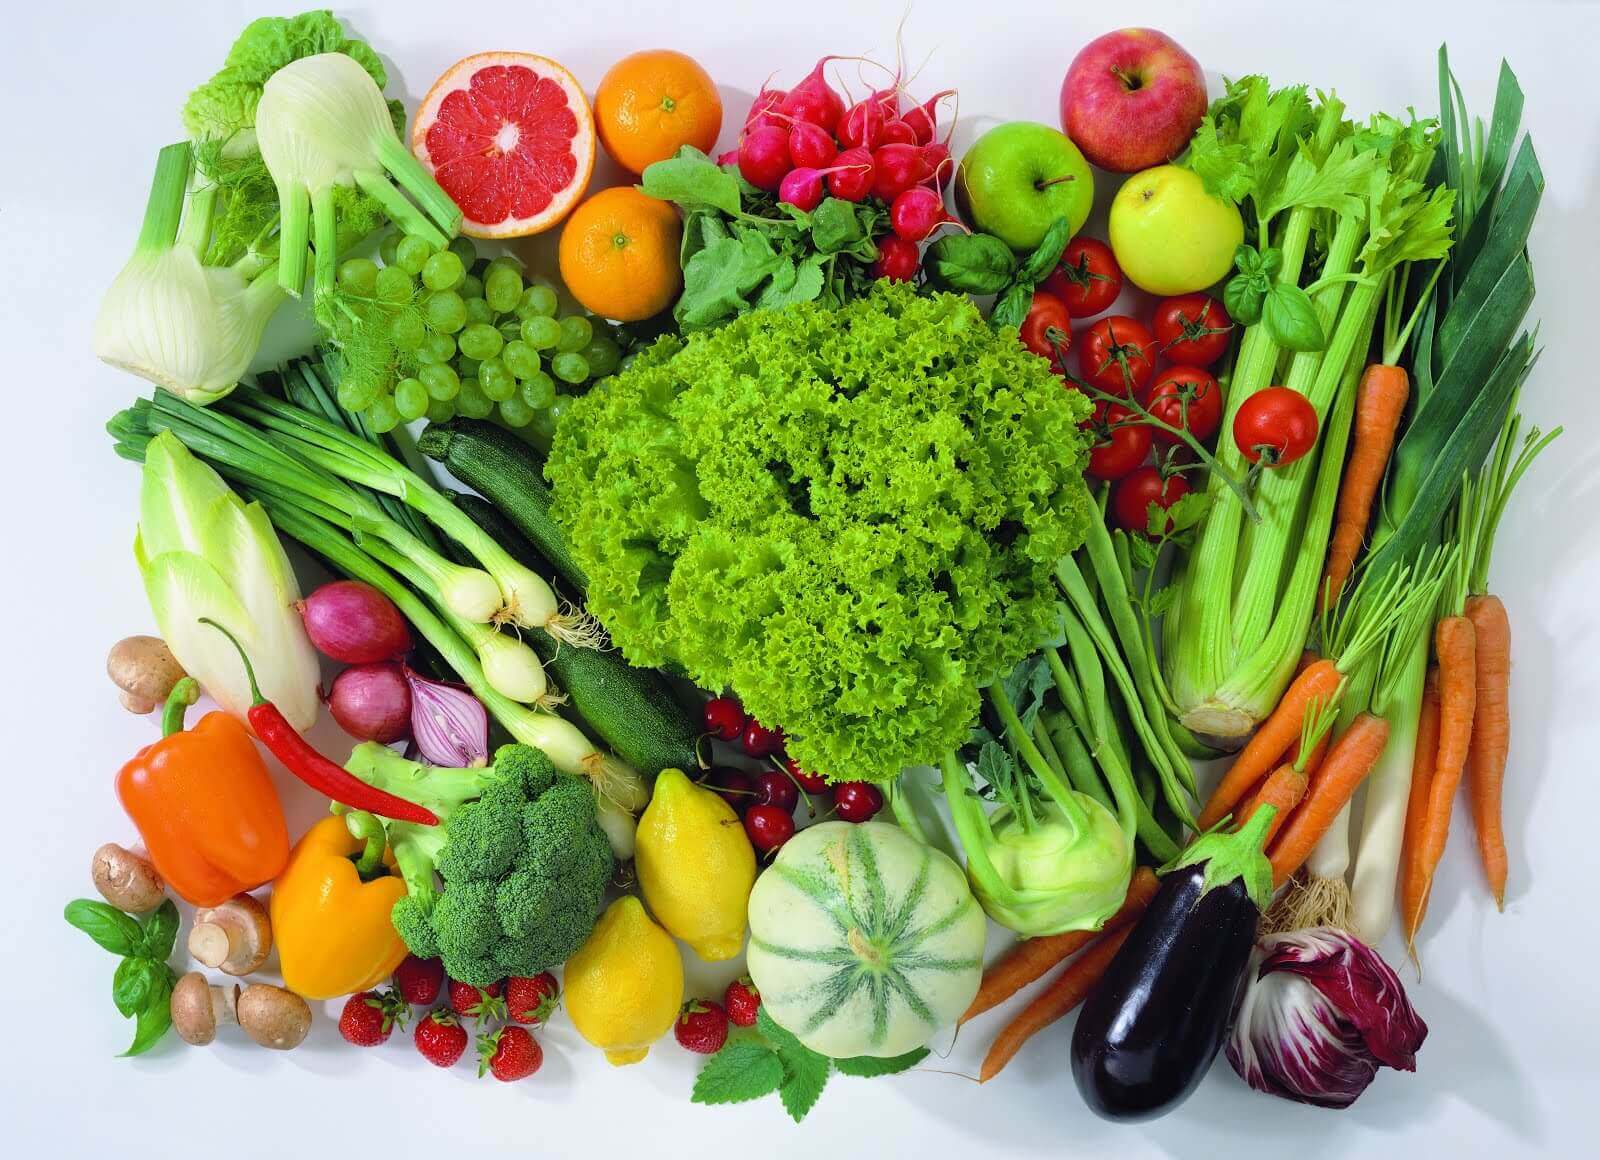 Fruit and vegetables to keep Arteries Healthy